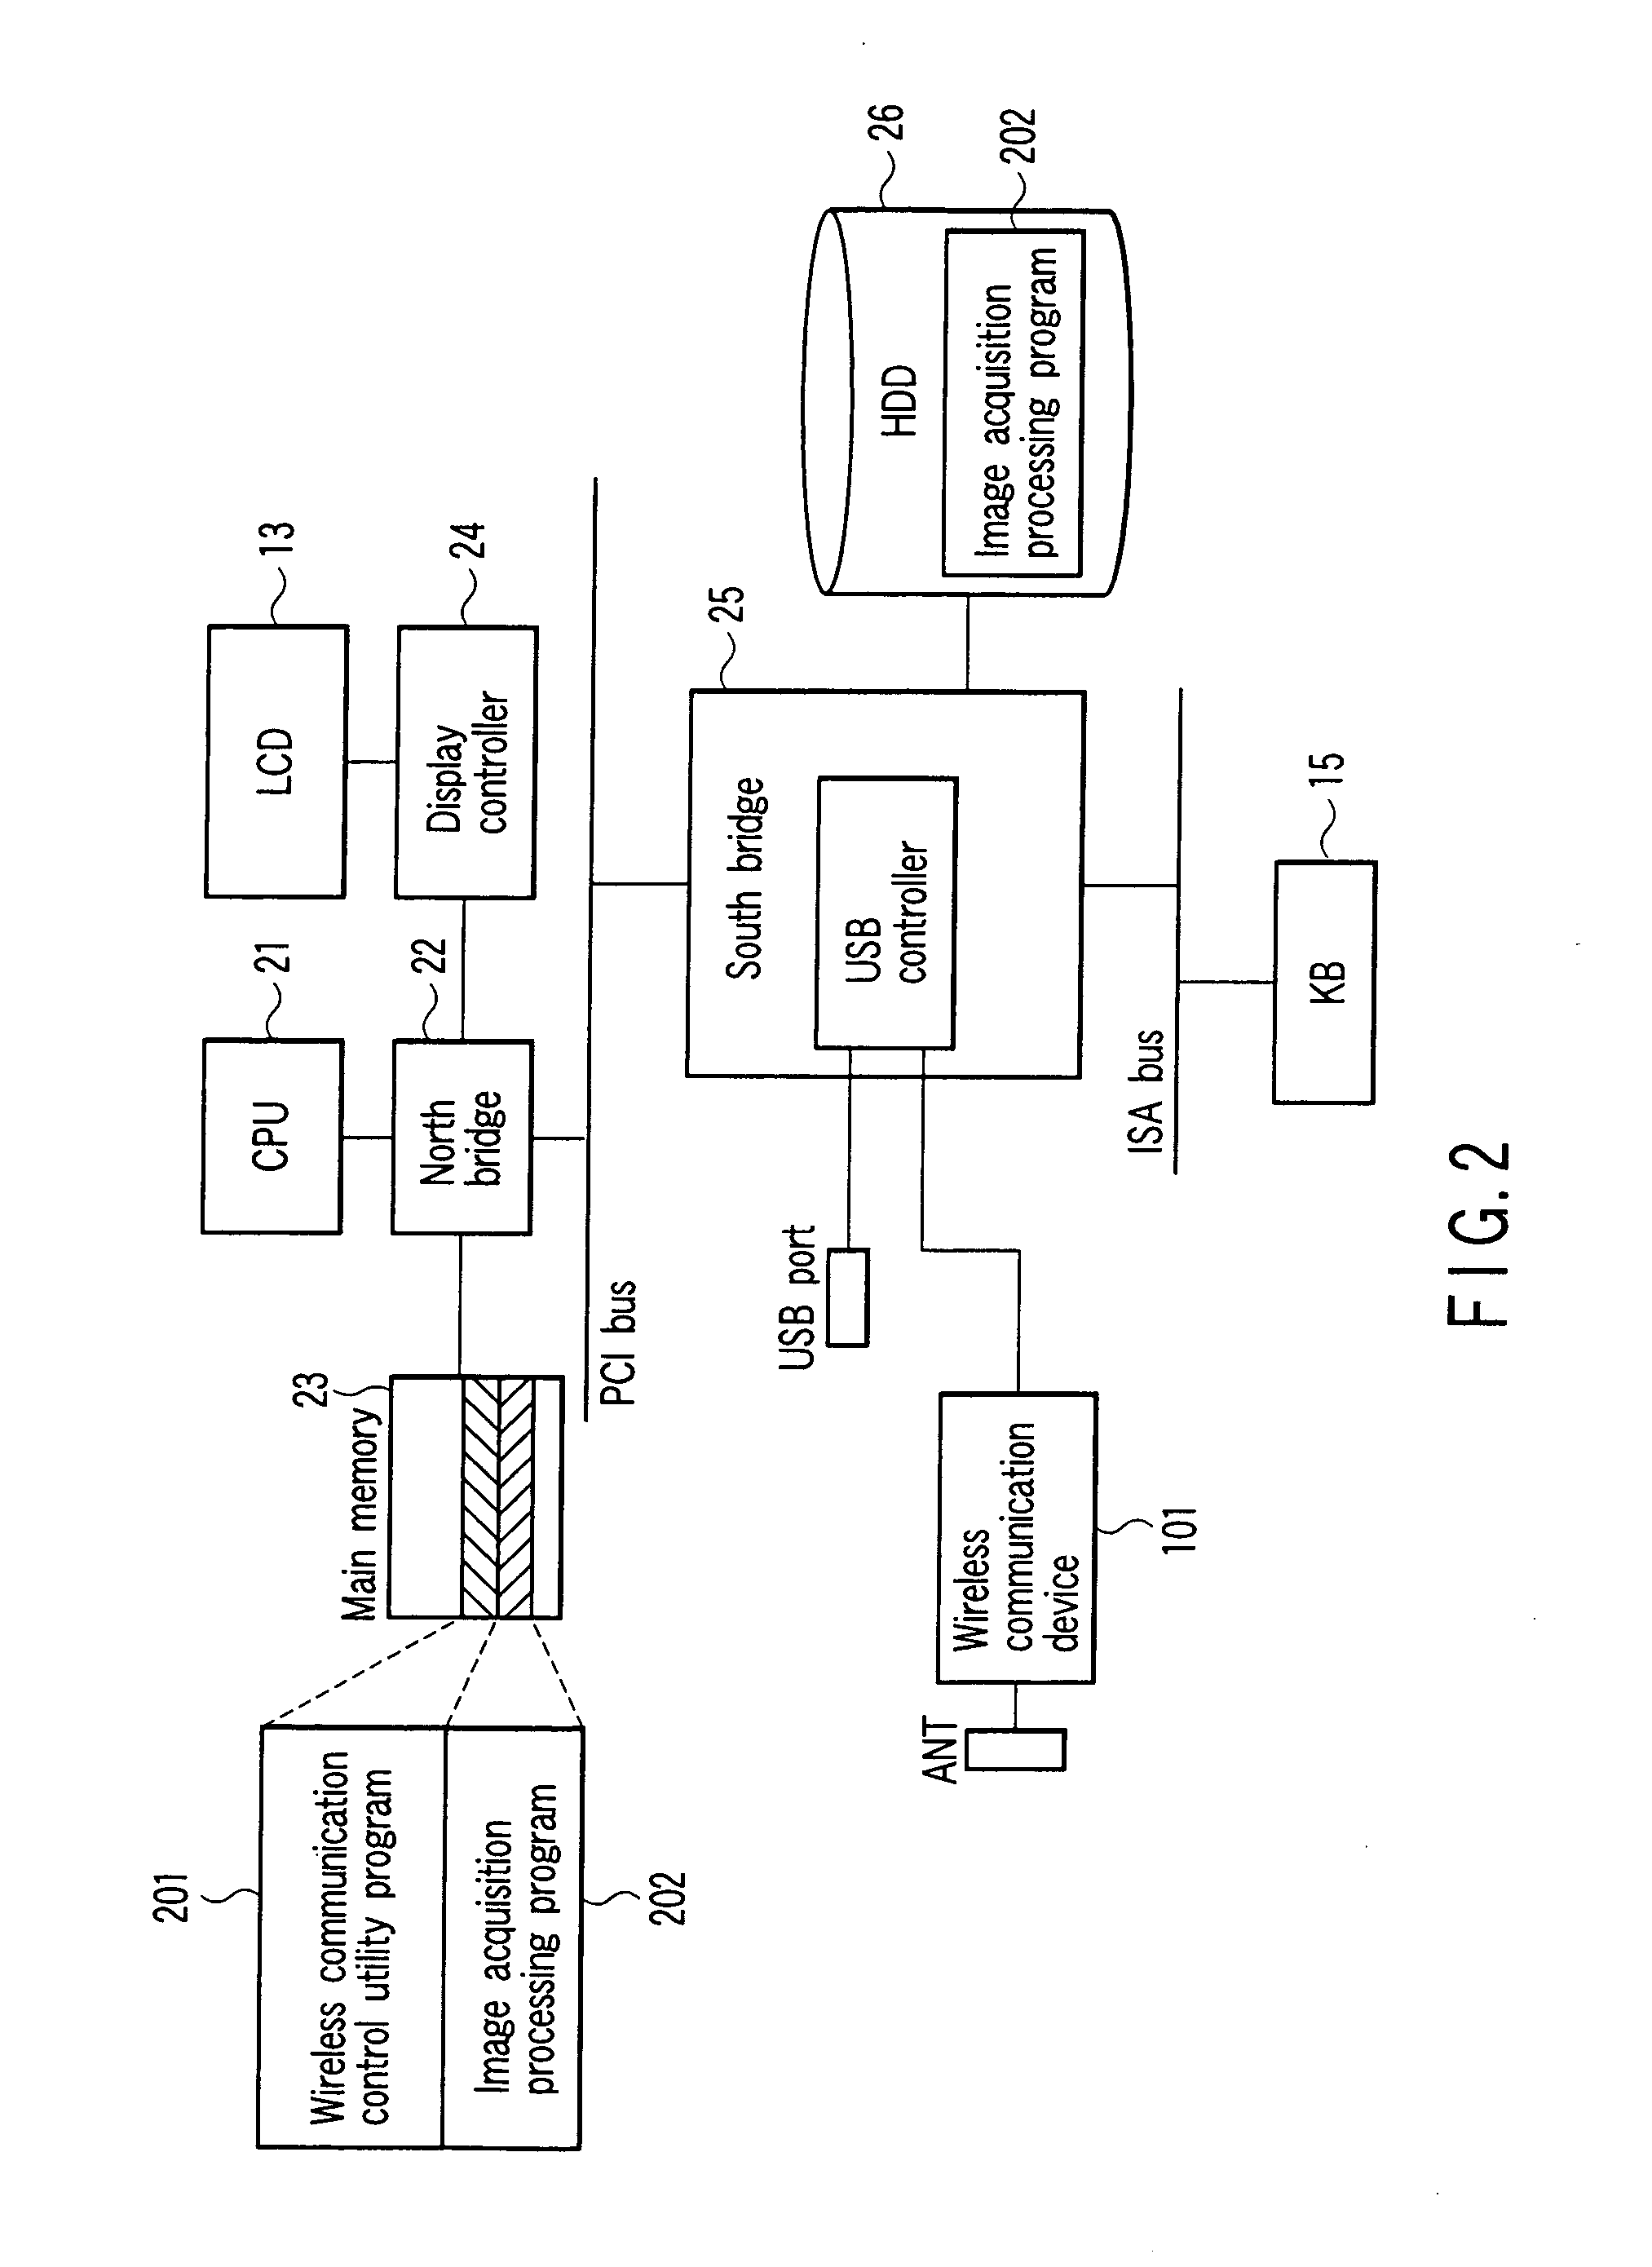 Electronic device and program